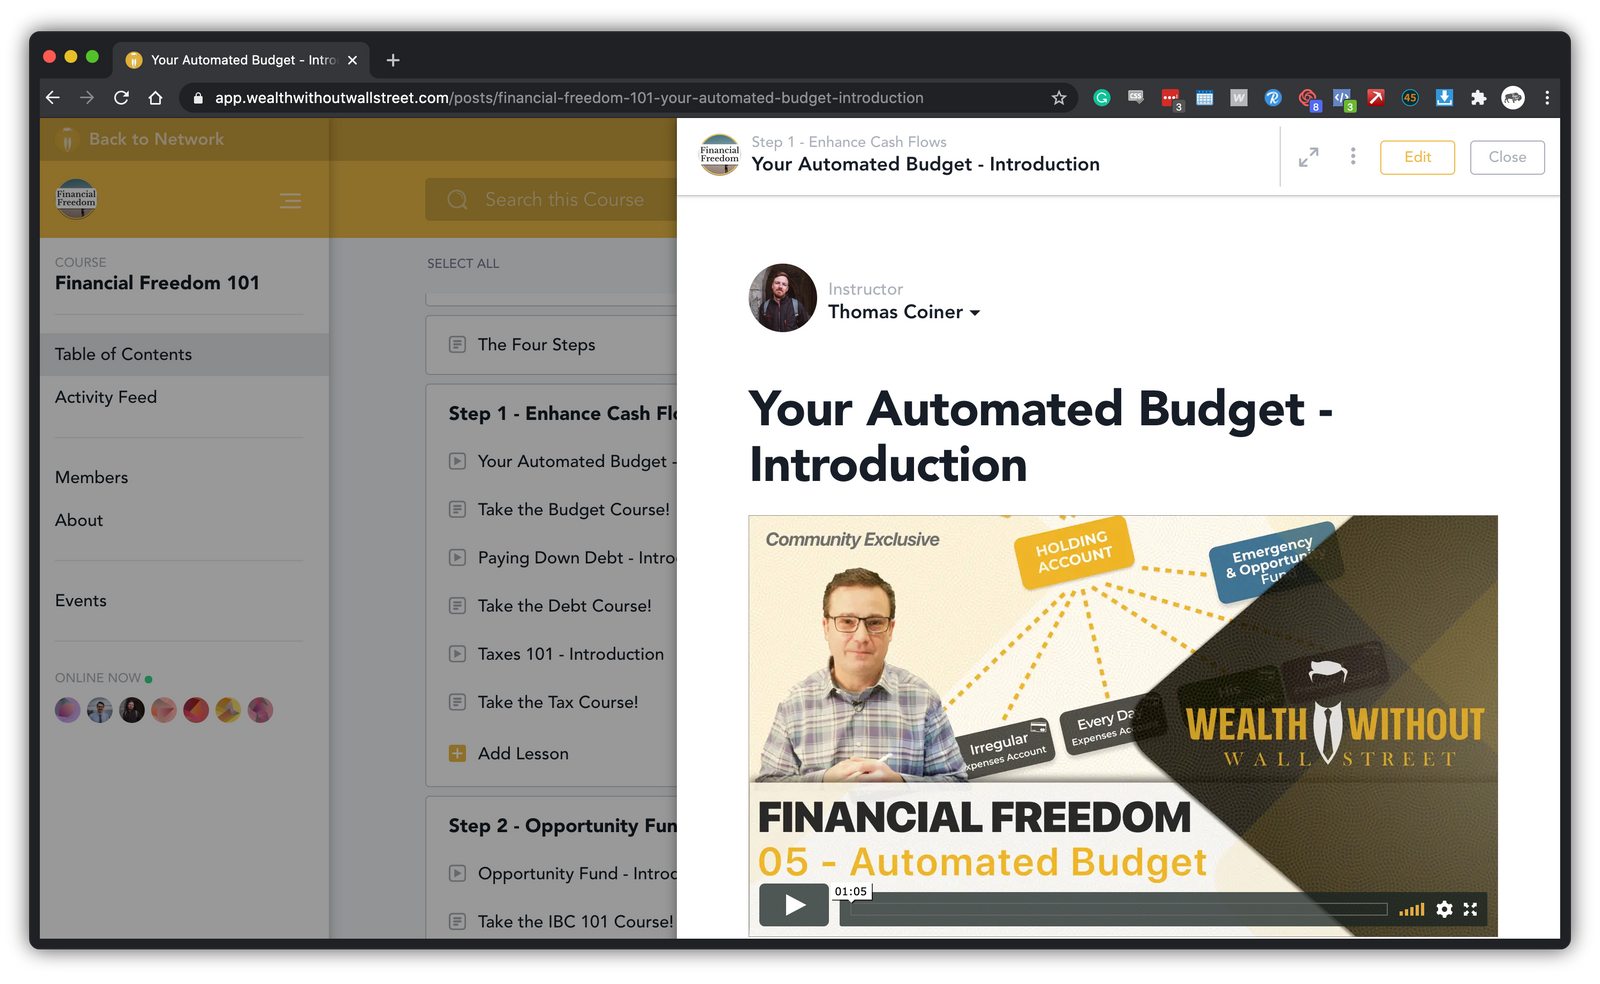 Your Automated Budget - Introduction